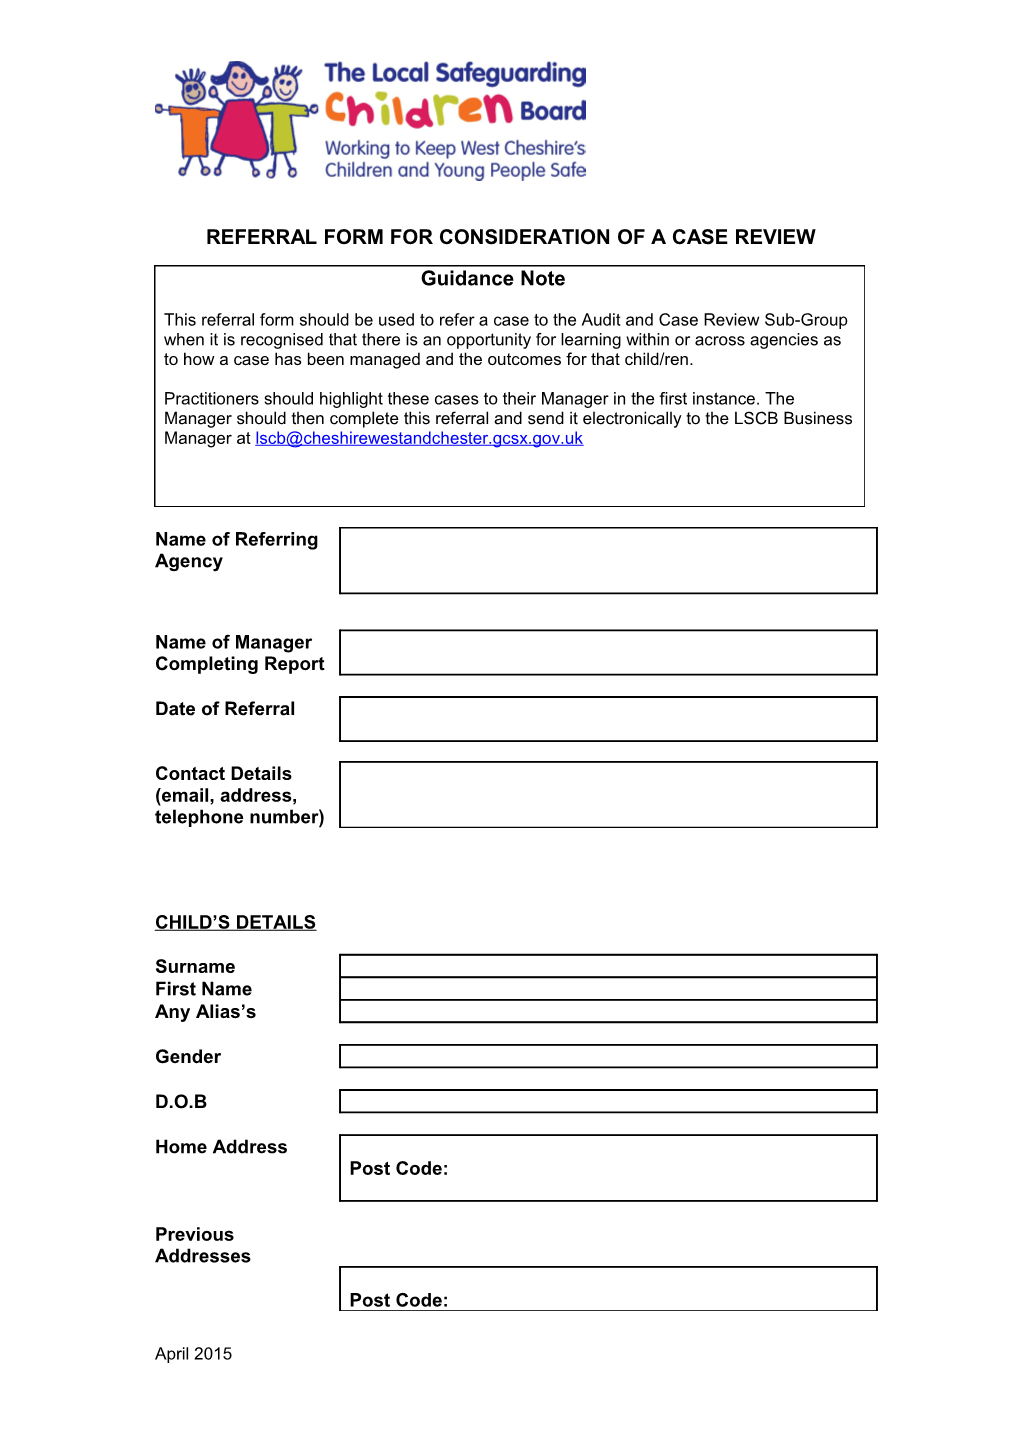 Referral Form for Consideration of a Case Review